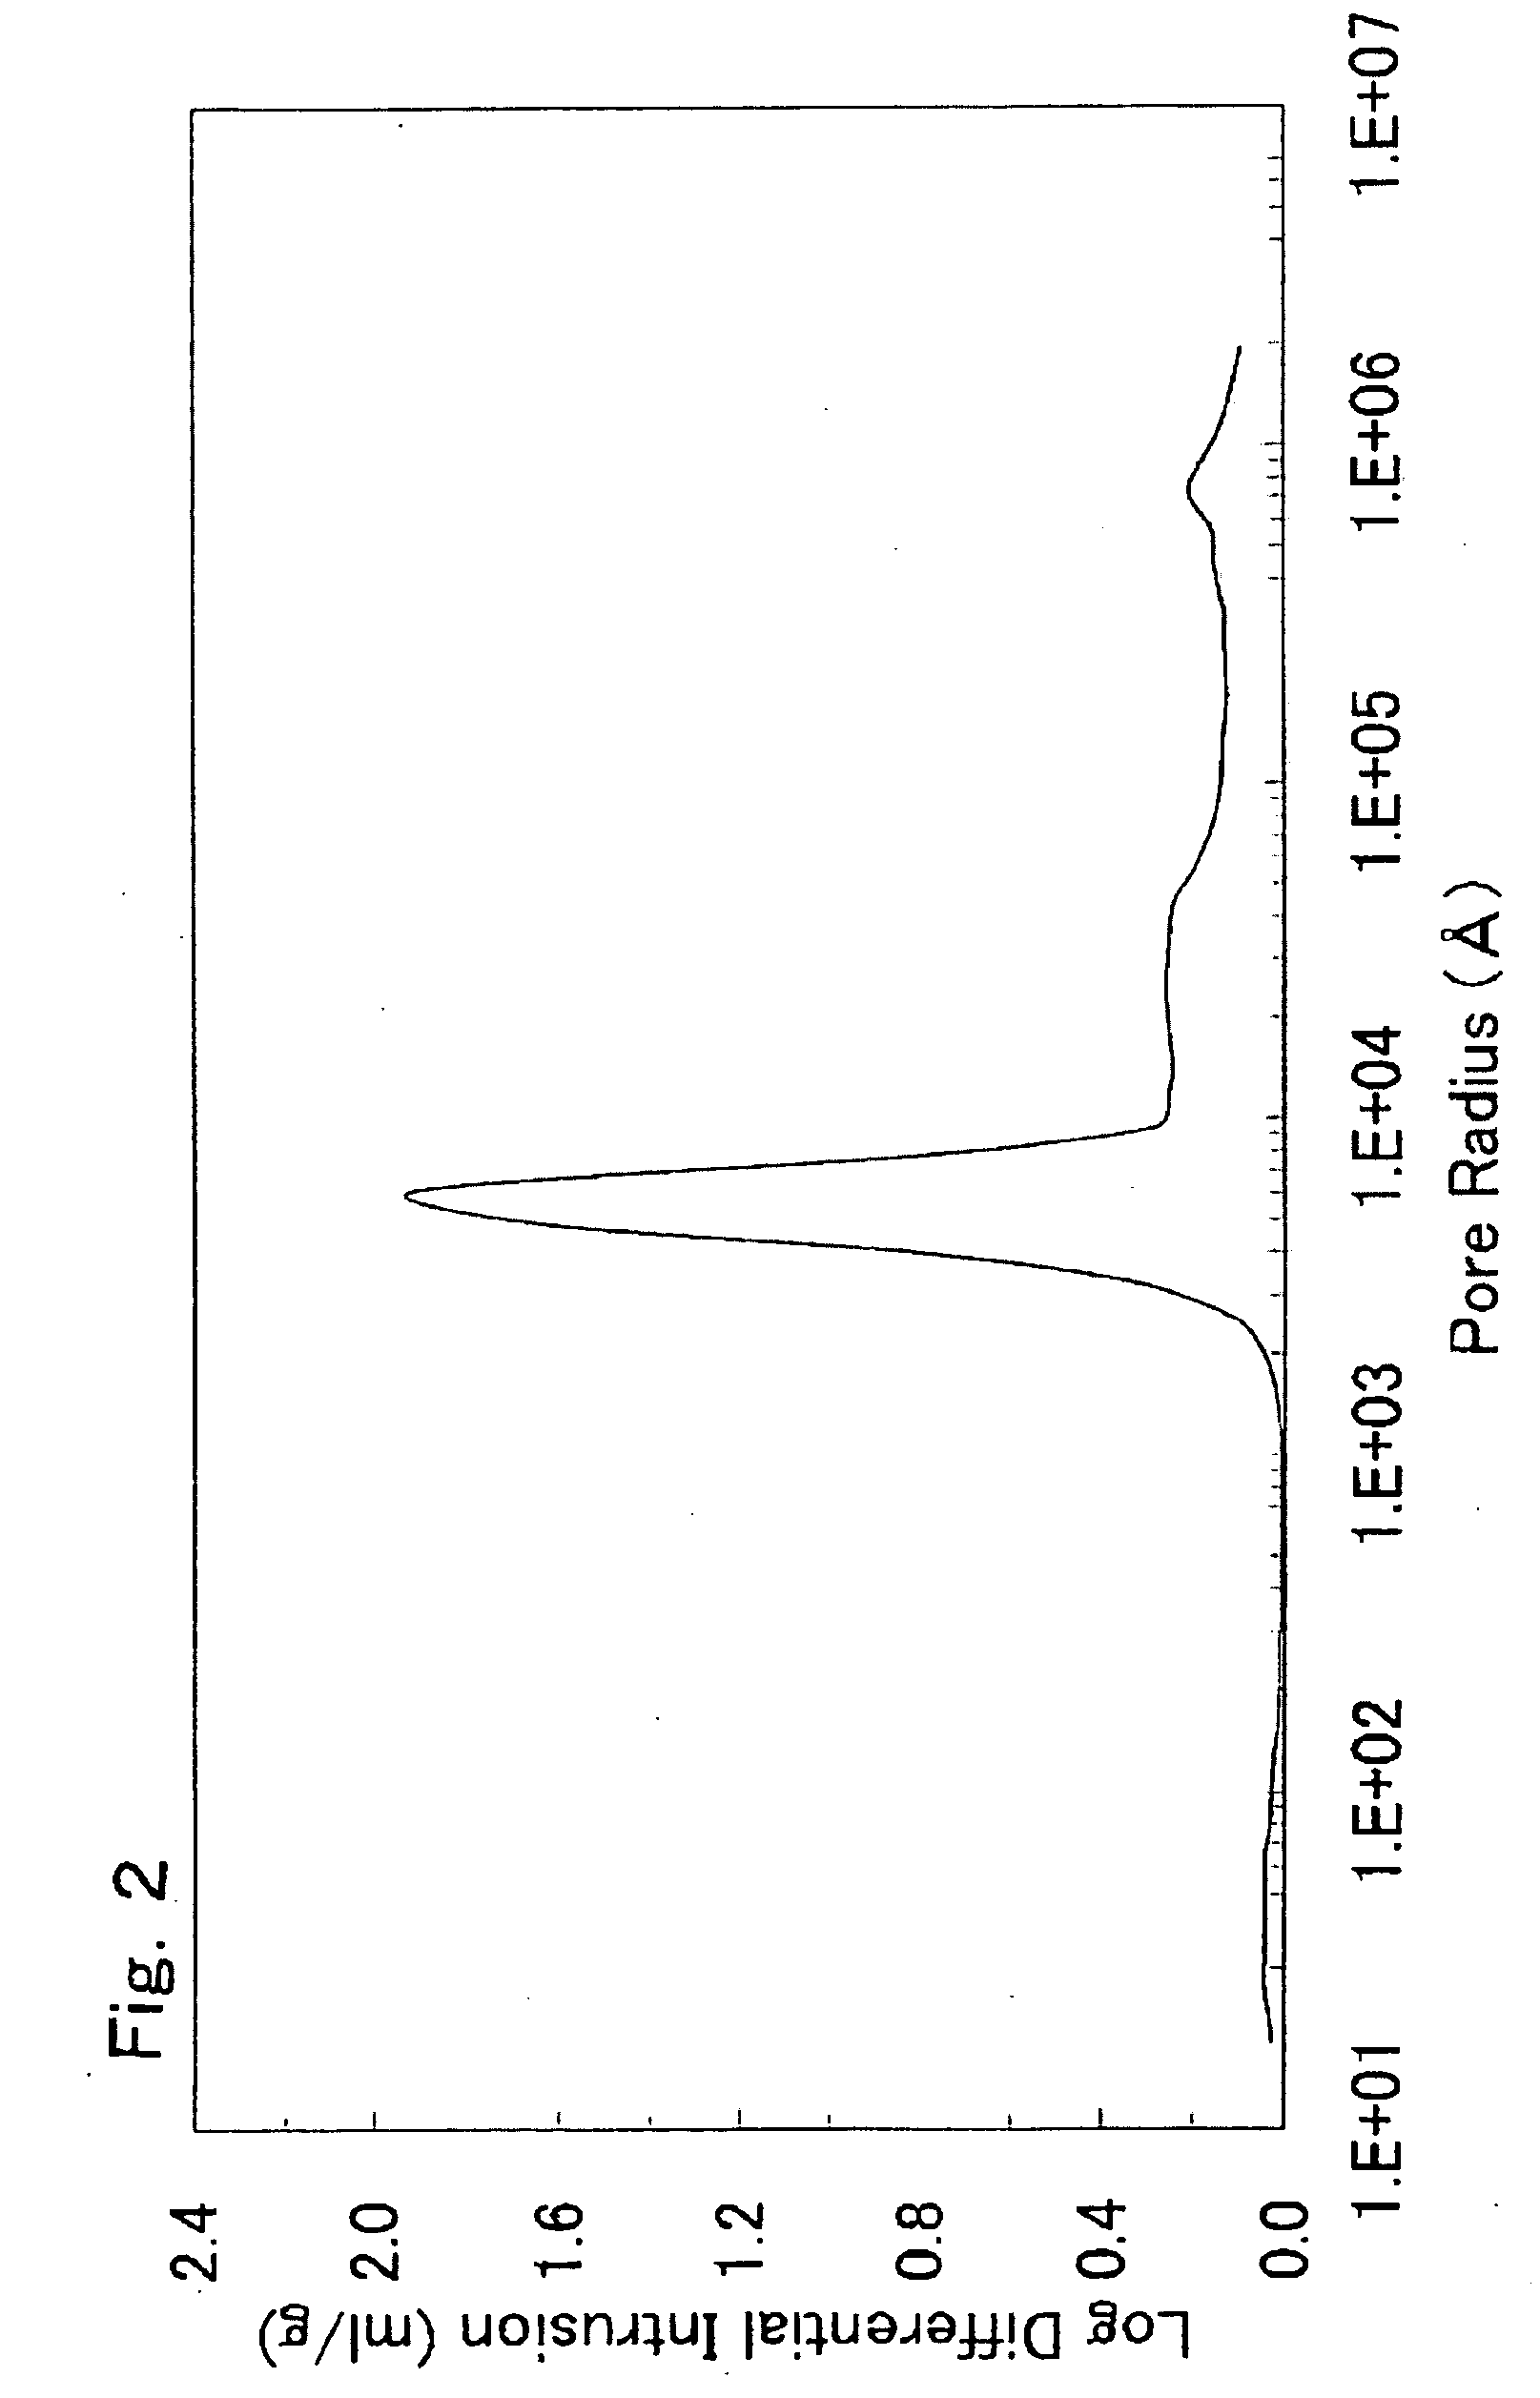 Lithium transition metal-based compound powder for positive electrode material in lithium rechargeable battery, method for manufacturing the powder, spray dried product of the powder, firing precursor of the powder, and positive electrode for lithium rechargeable battery and lithium rechargeable battery using the powder